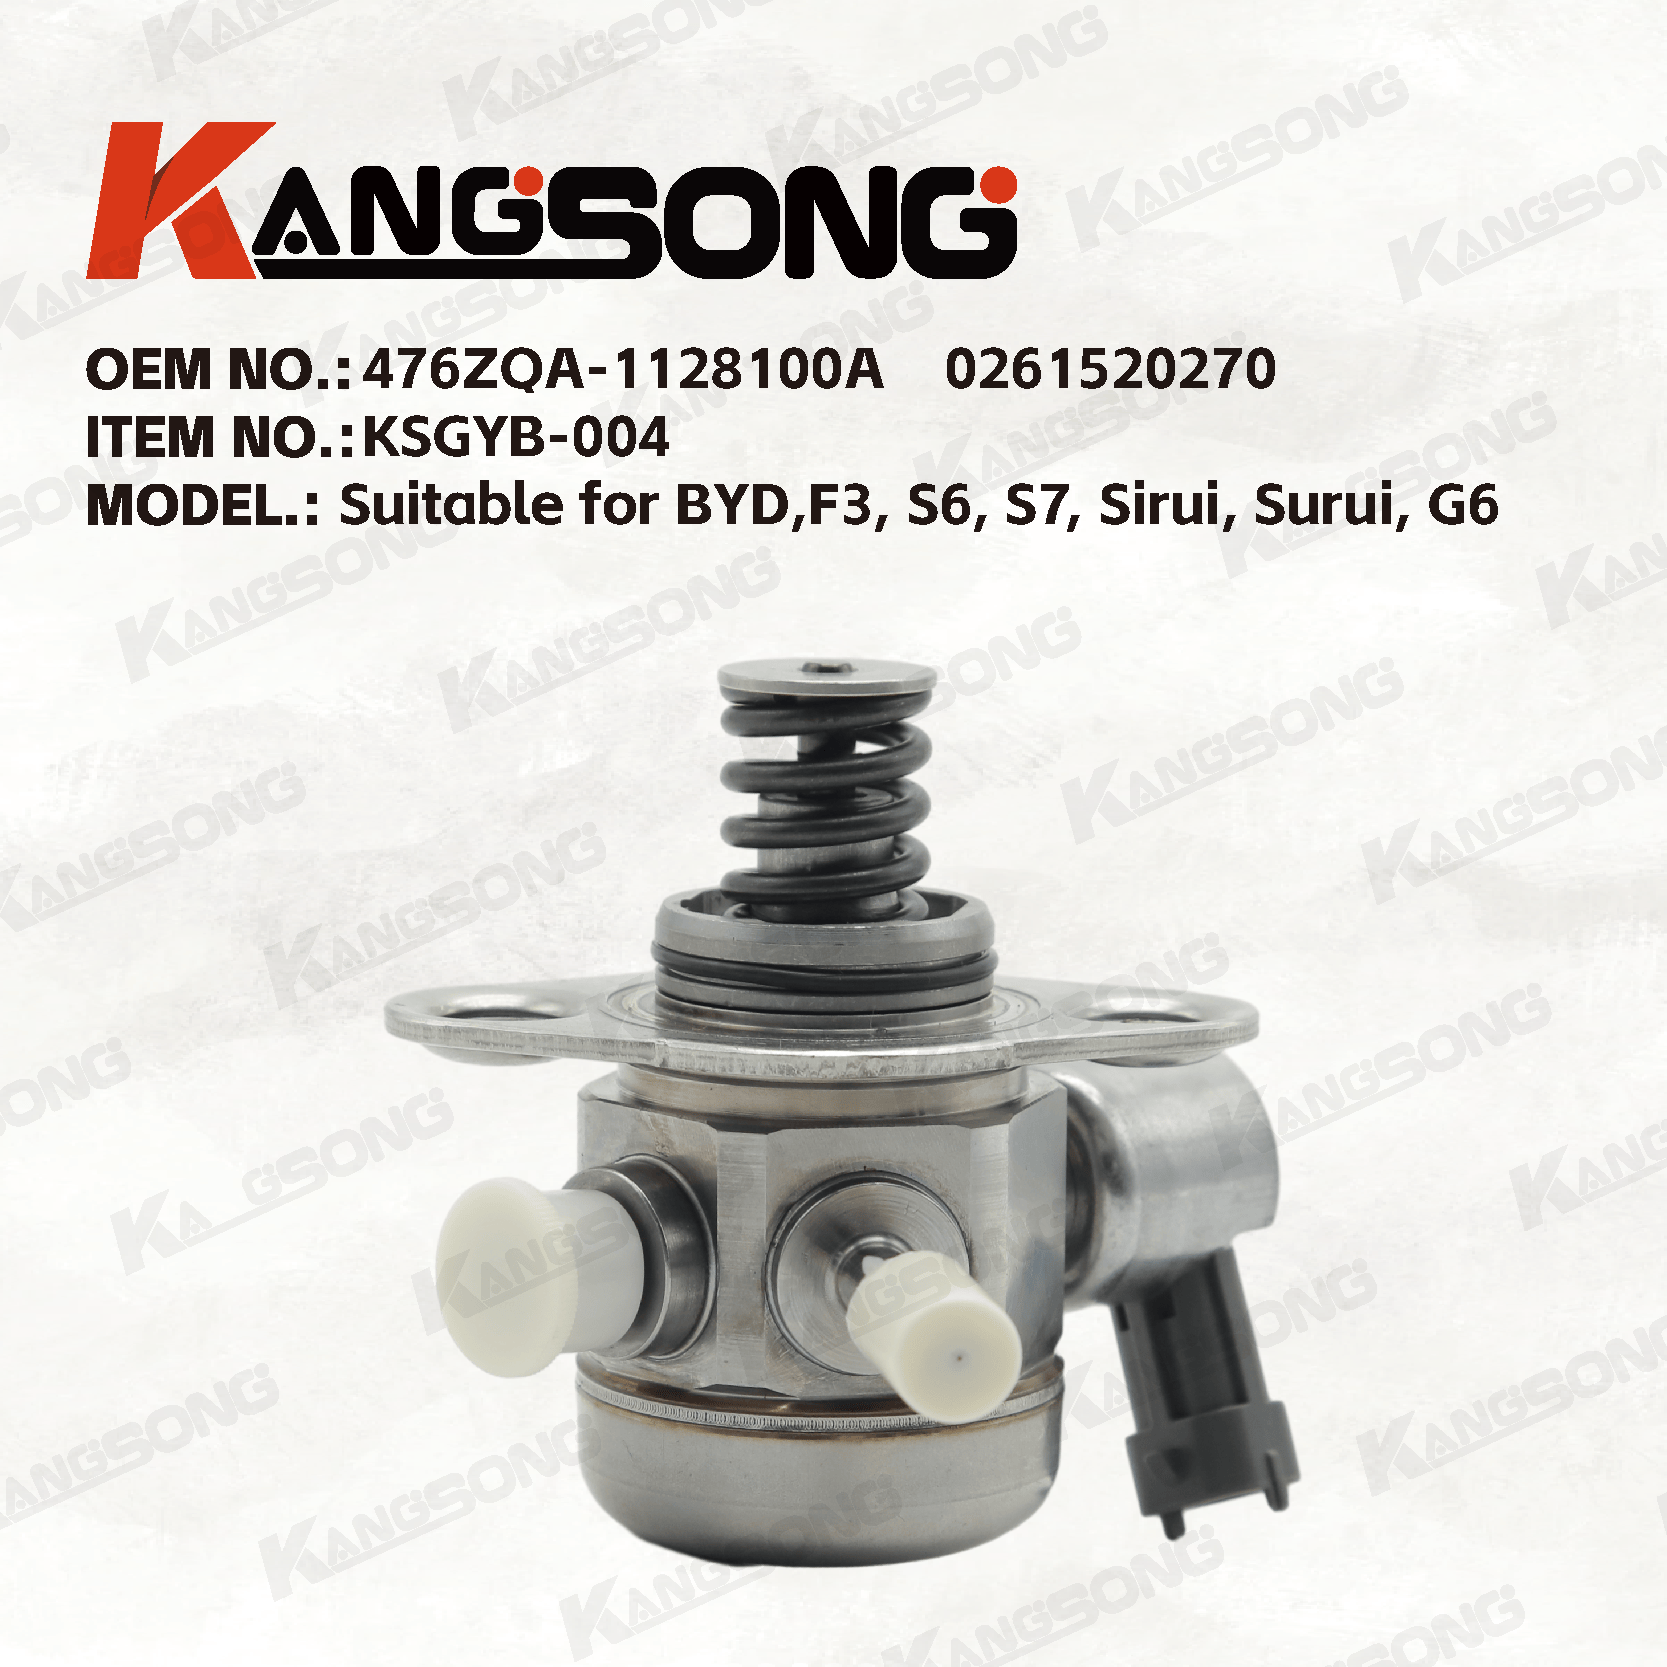 Applicable to BYD's/476ZQA-1128100A 0261520270/ High pressure fuel pump/KSGYB-004